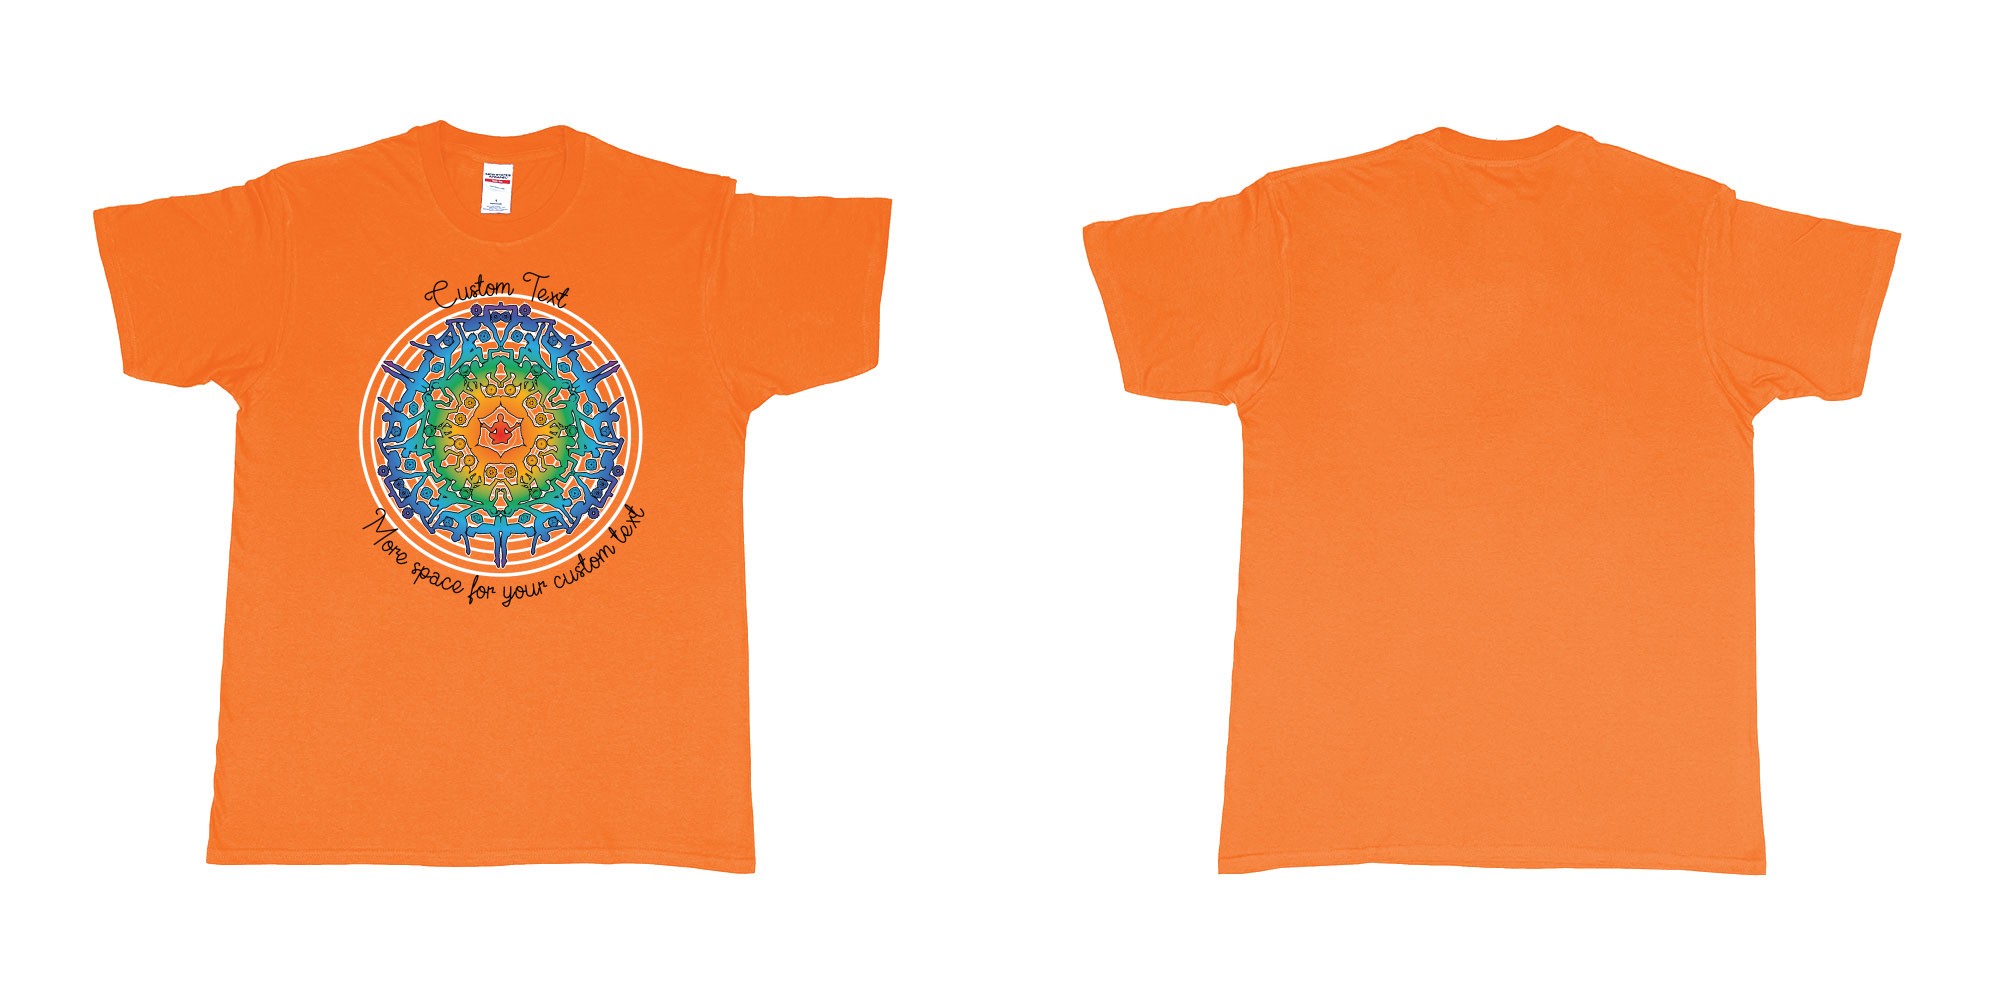 Custom tshirt design yoga mandala in fabric color orange choice your own text made in Bali by The Pirate Way